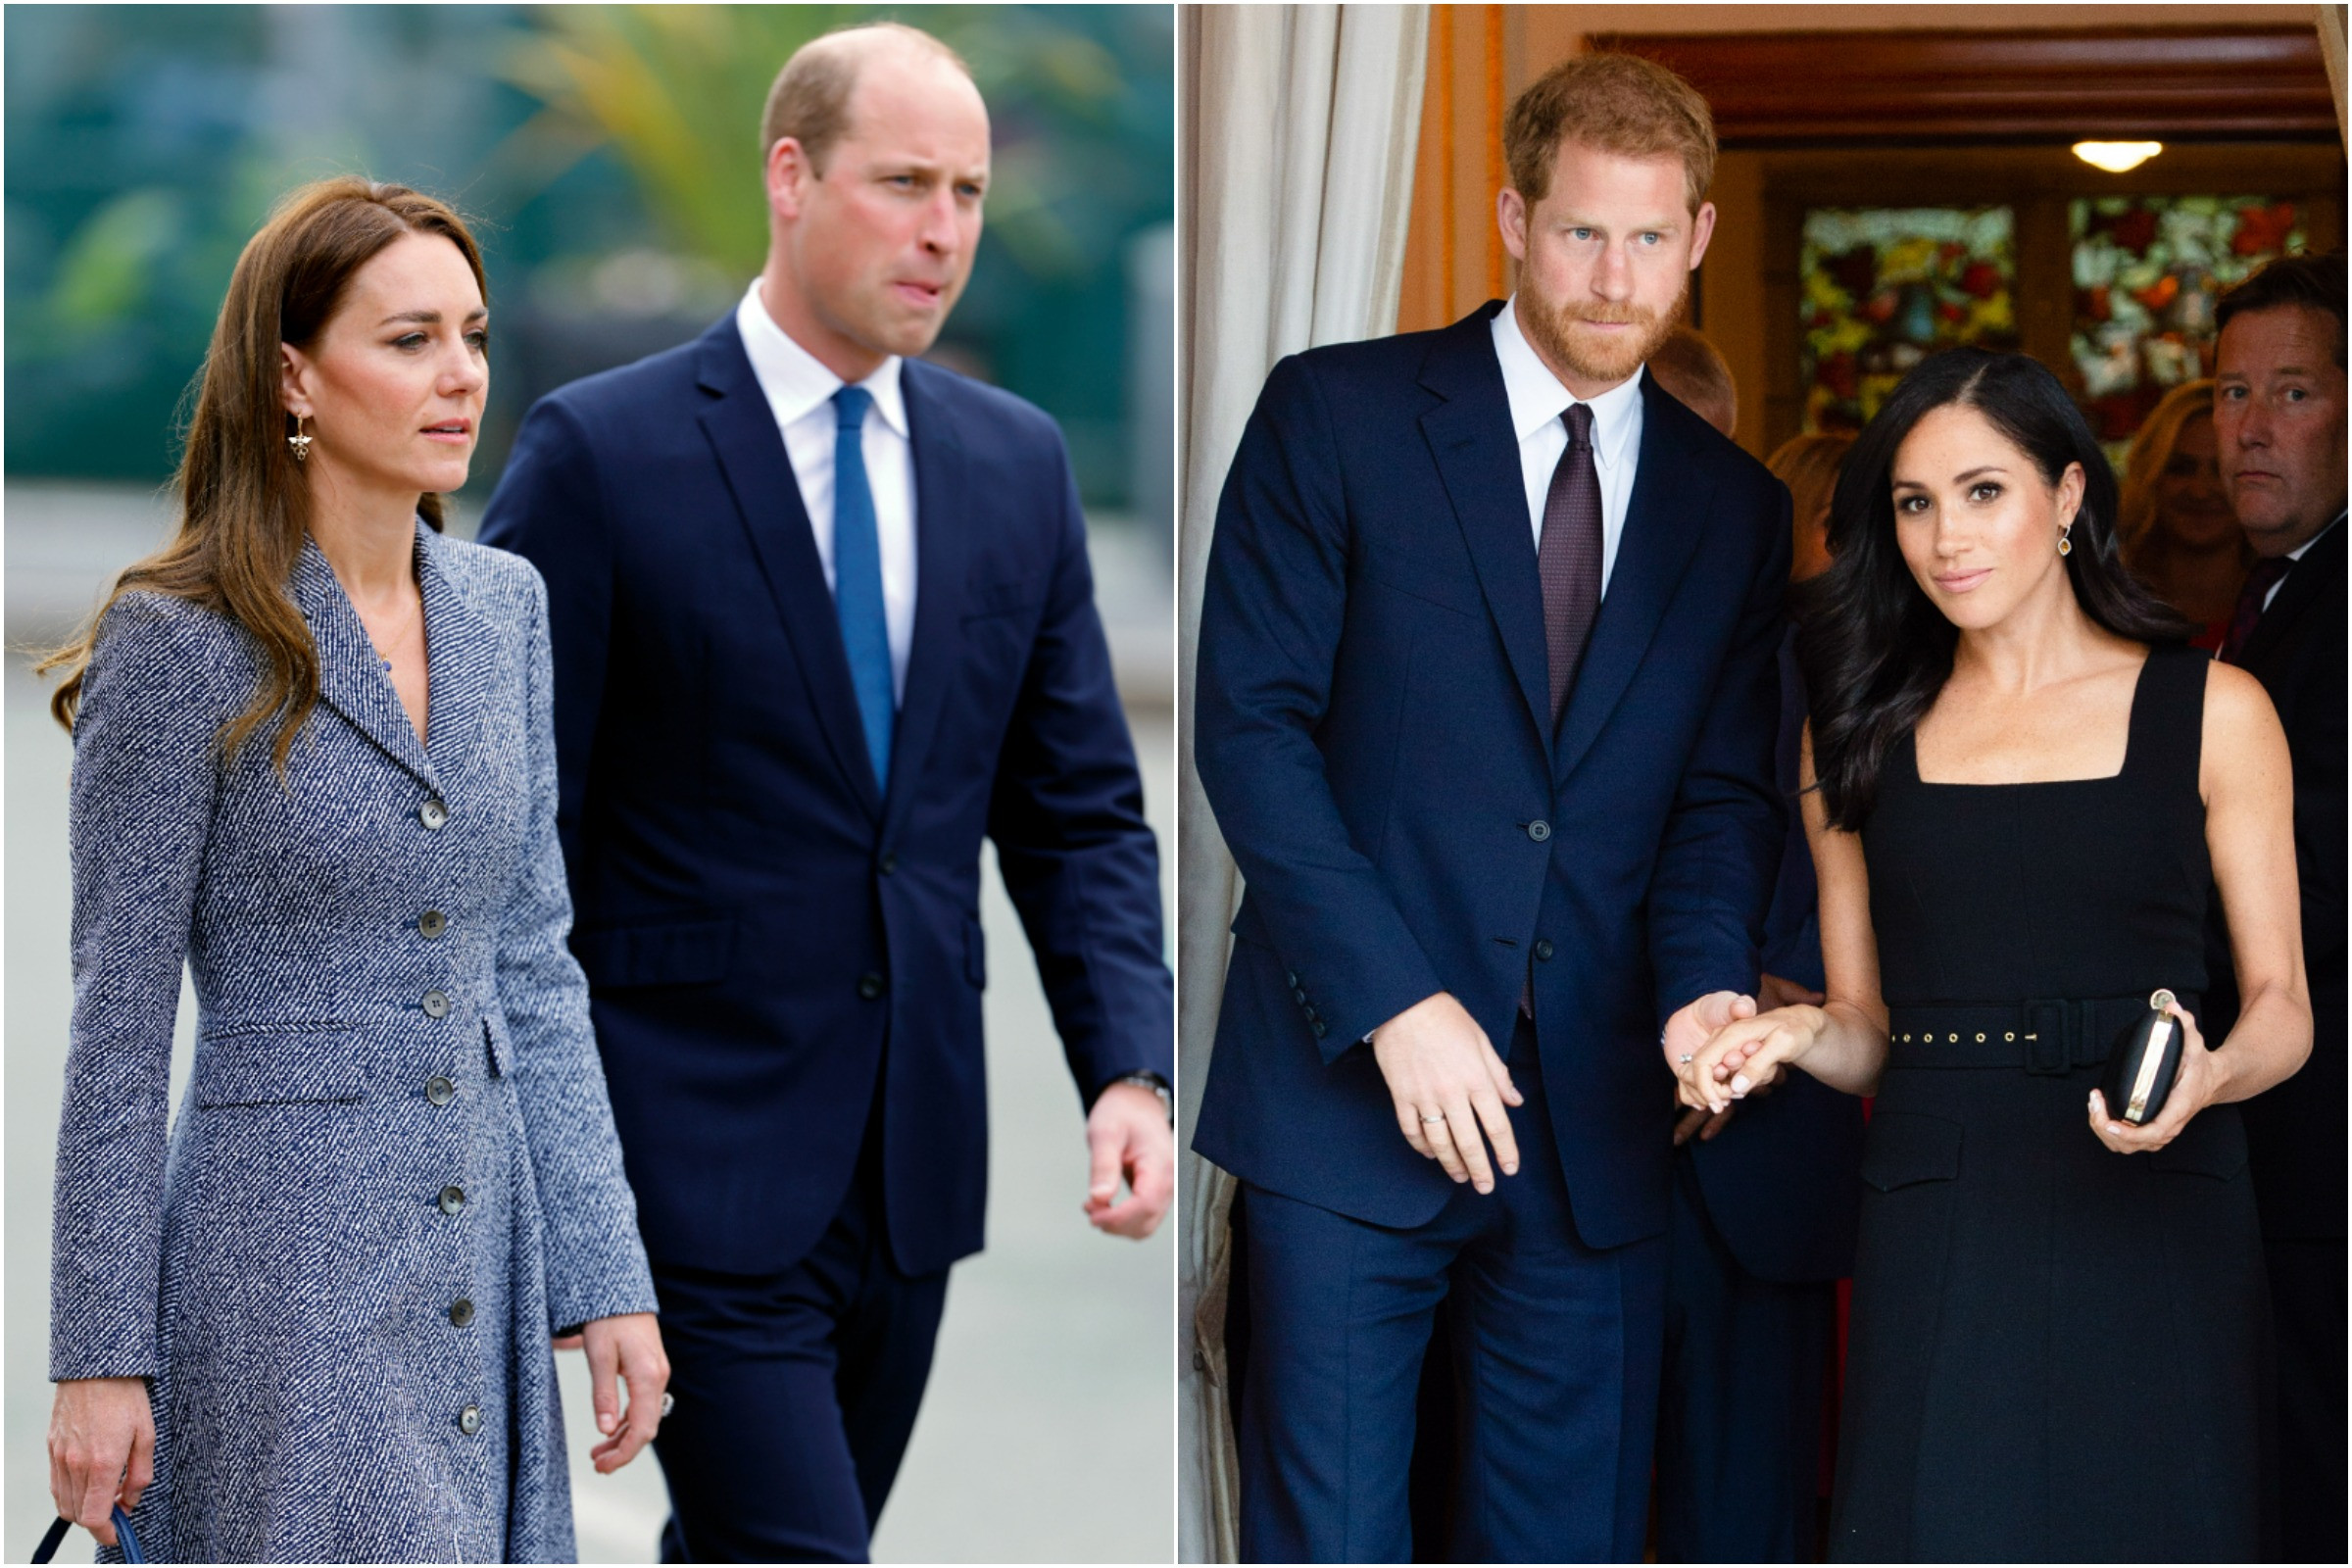 Prince William Not Letting Harry Anywhere Near Kate Middleton, the 39-year-old prince would love to "reconnect" with Kate but "unfortunately, it doesn't appear [Prince] William is willing to let his brother anywhere near his ailing wife."